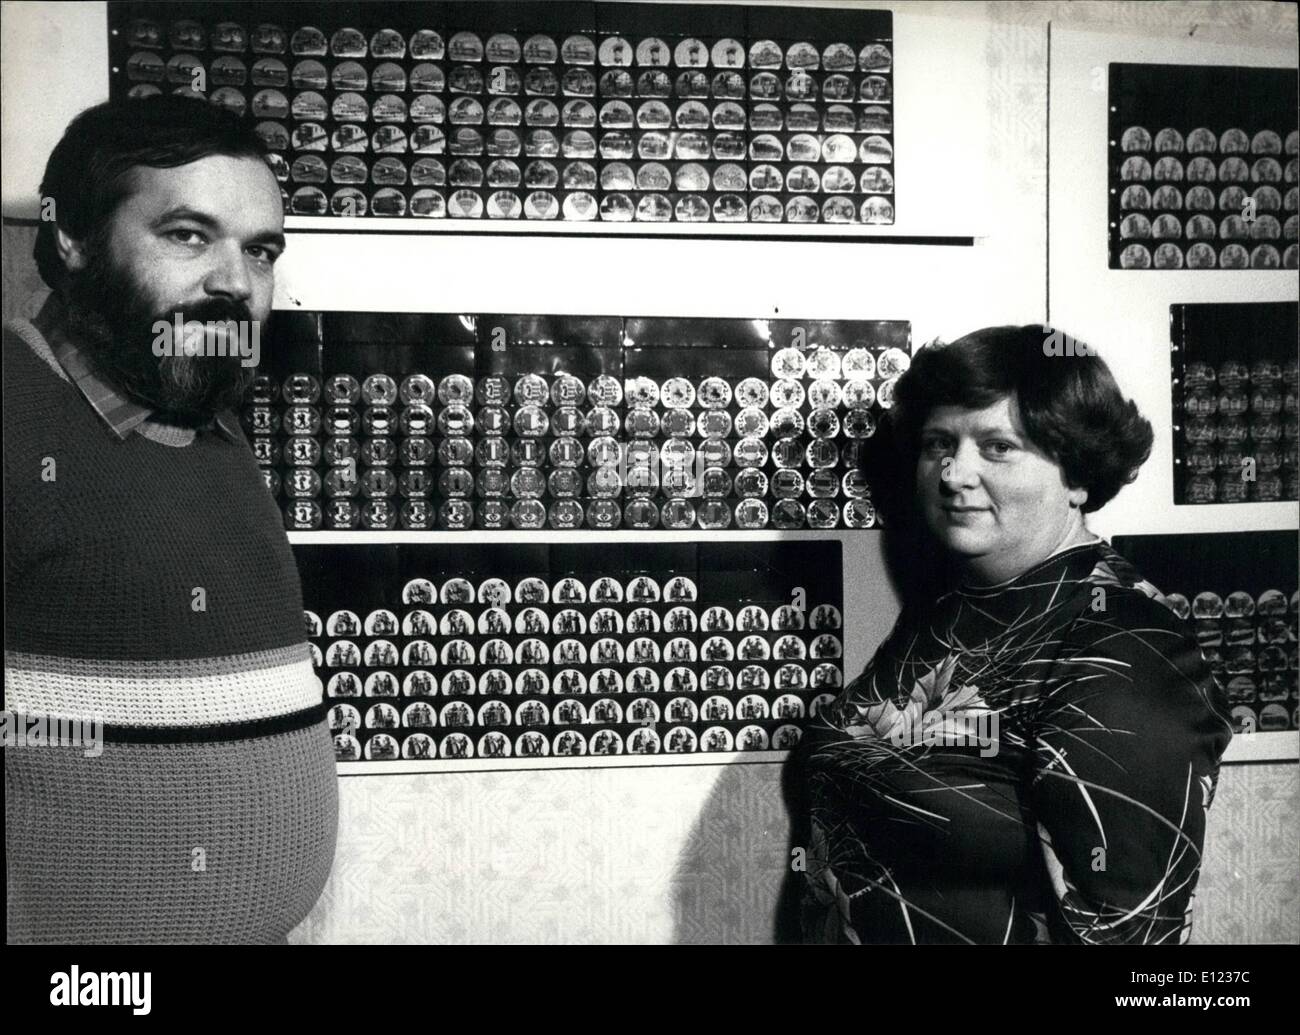 Feb. 02, 1984 - Collecting Thousands of Aluminum Lids: Swiss Peter Oehen has a rare hobby: Collecting Thousands of Aluminum Lids from the small creams cup served to your coffee or tea. Proudly he shows here together with his wife the collection at home. Stock Photo